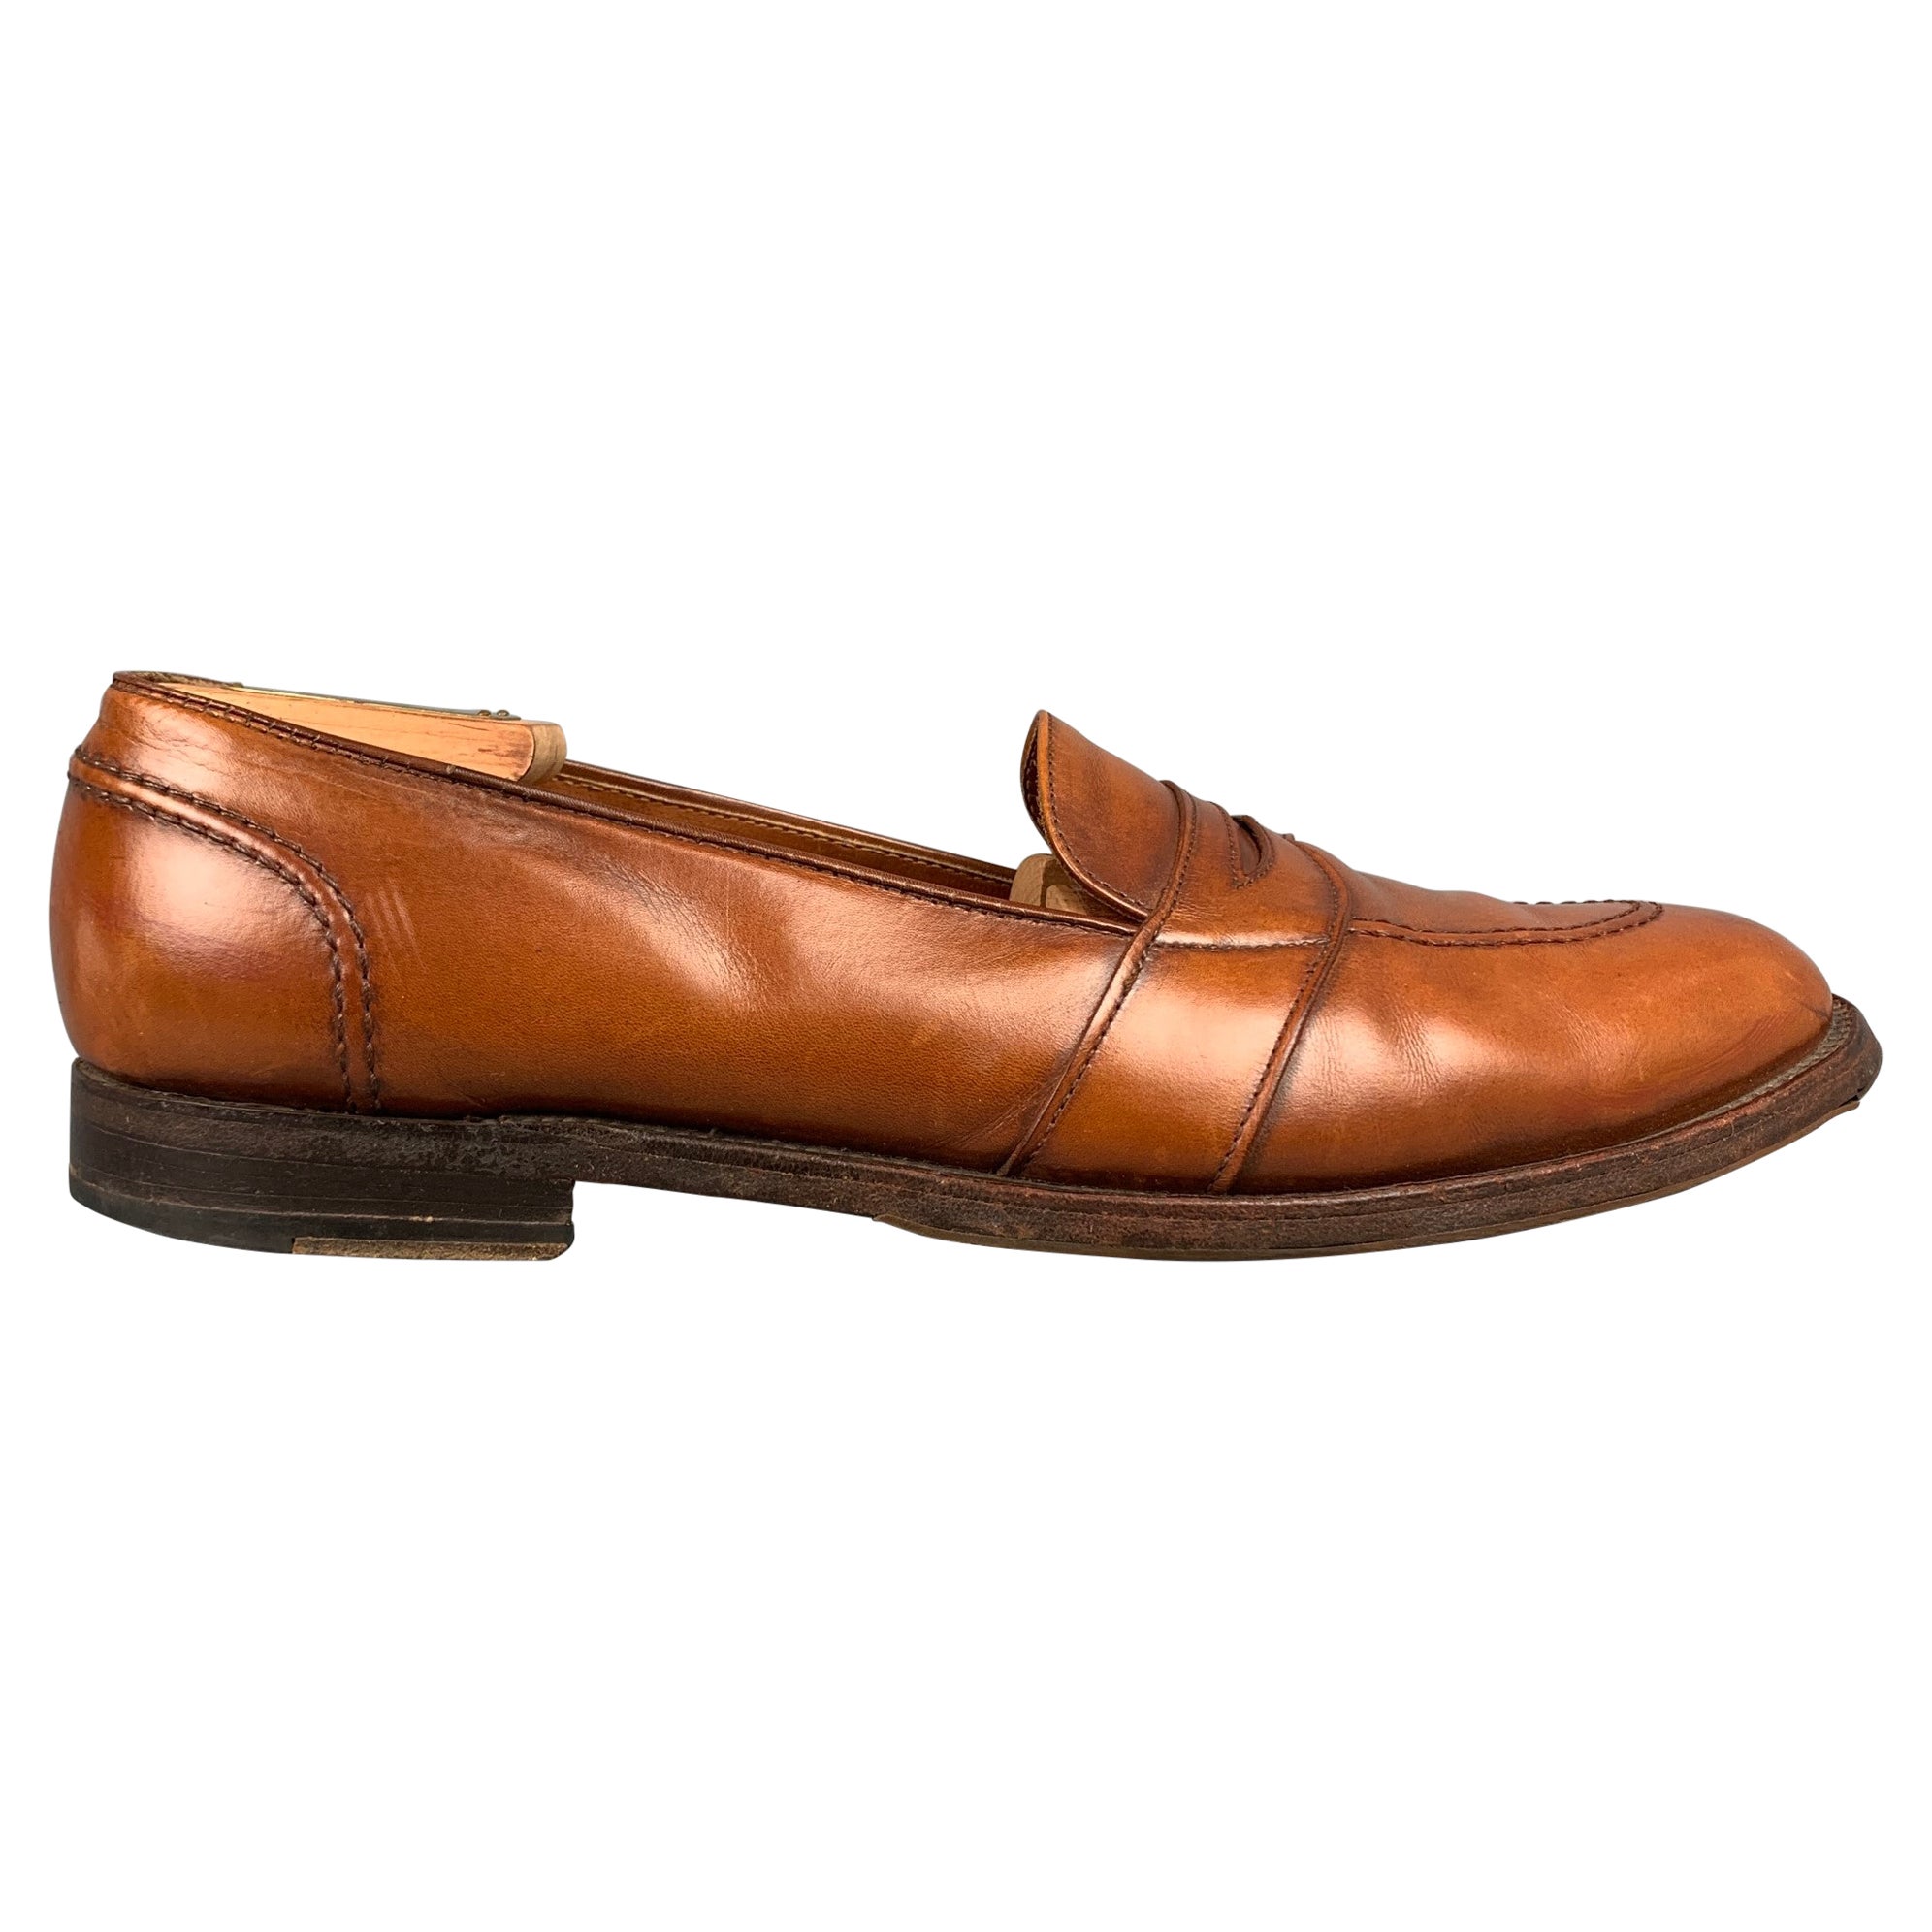 ALDEN 685 Size 15 Tan Leather Cap Toe Penny Loafers